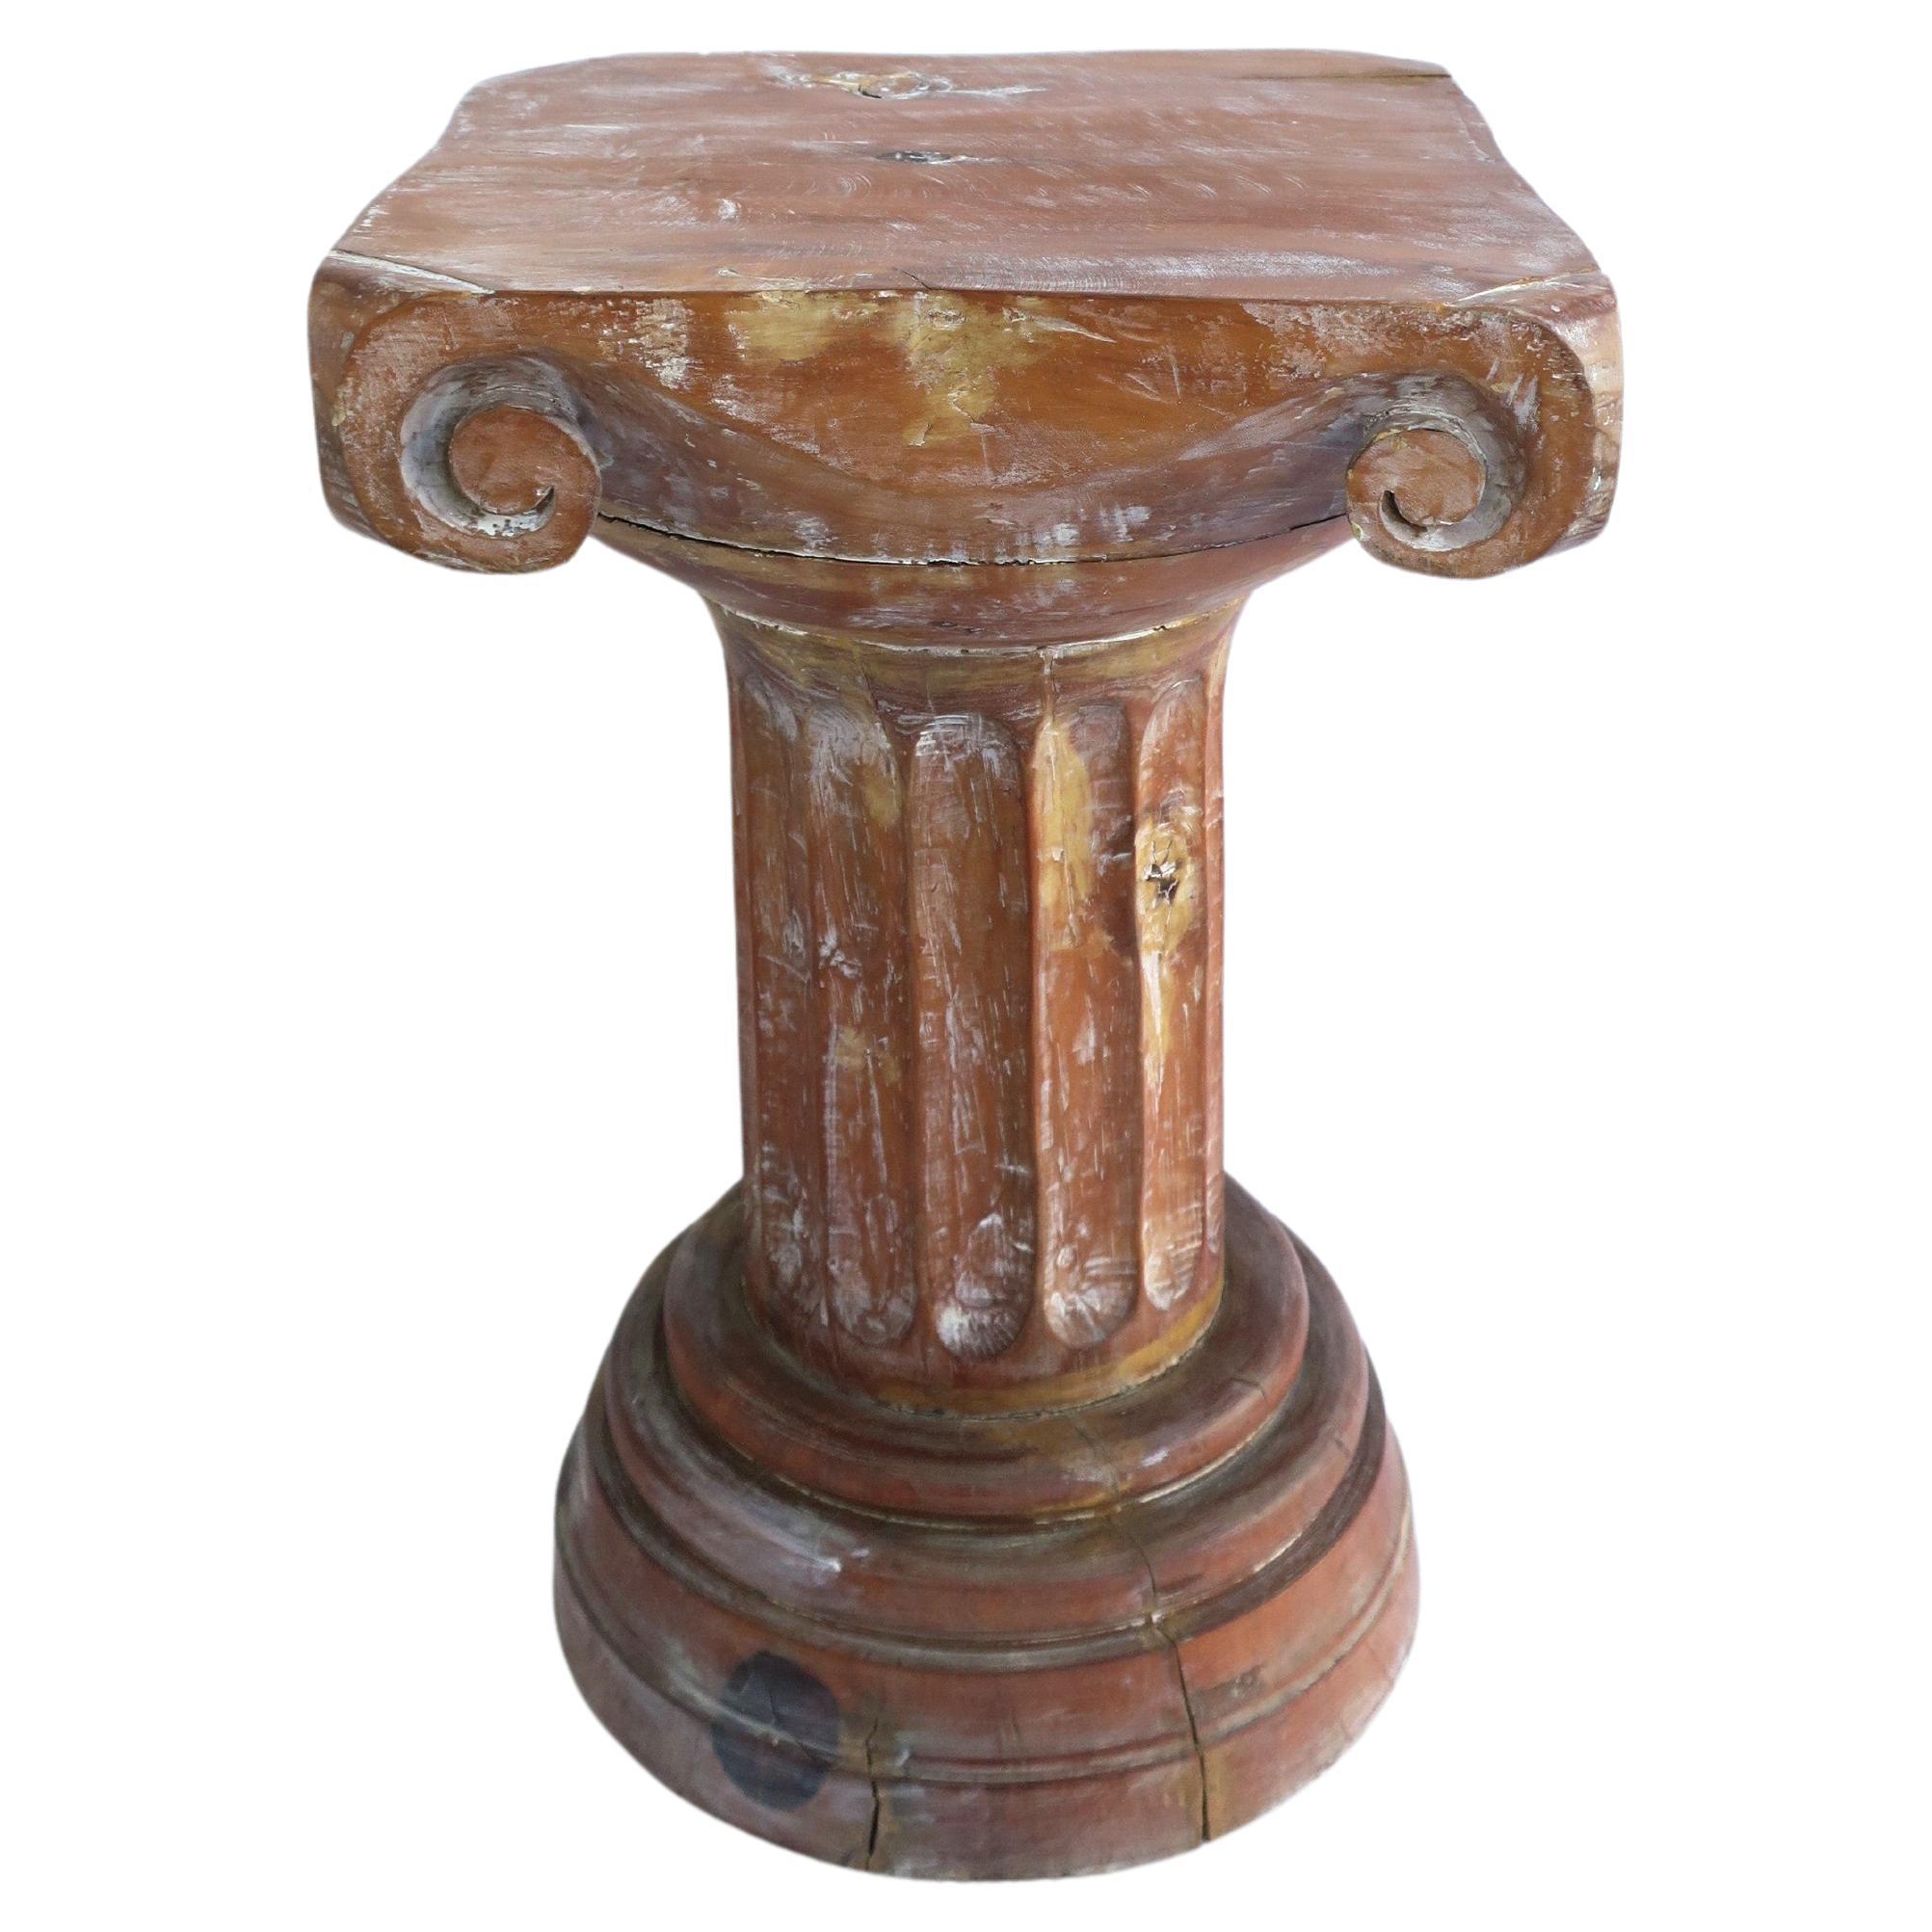 Wood Column Pedestal Table Neoclassical for Sculpture or Cocktail For Sale